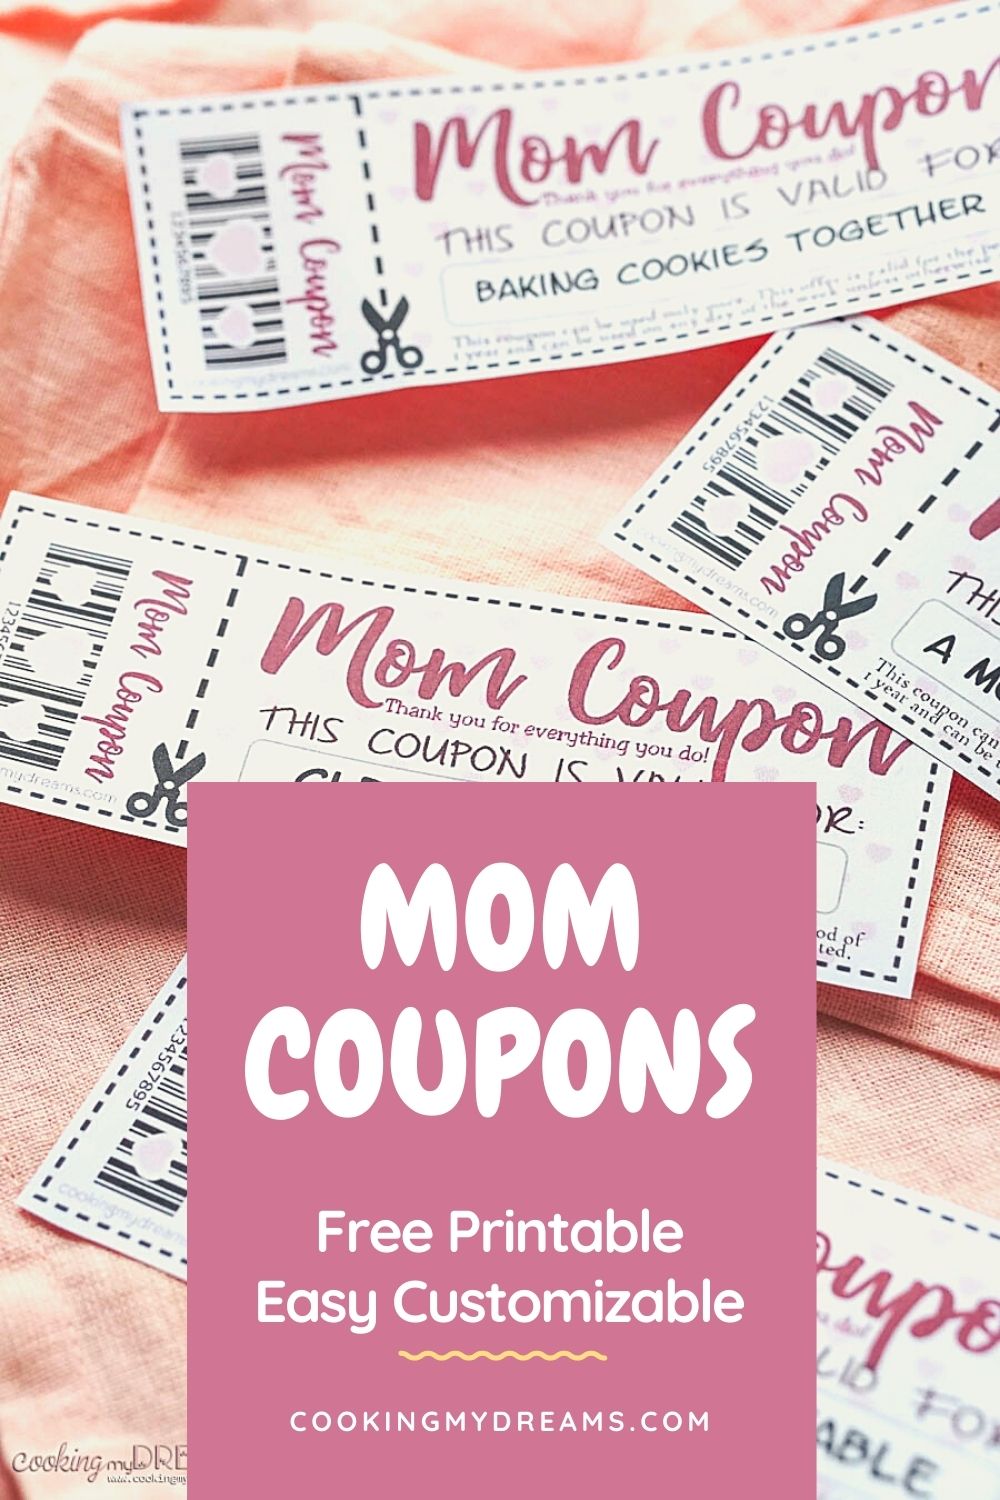 Free Printable Coupon For Lunch Date